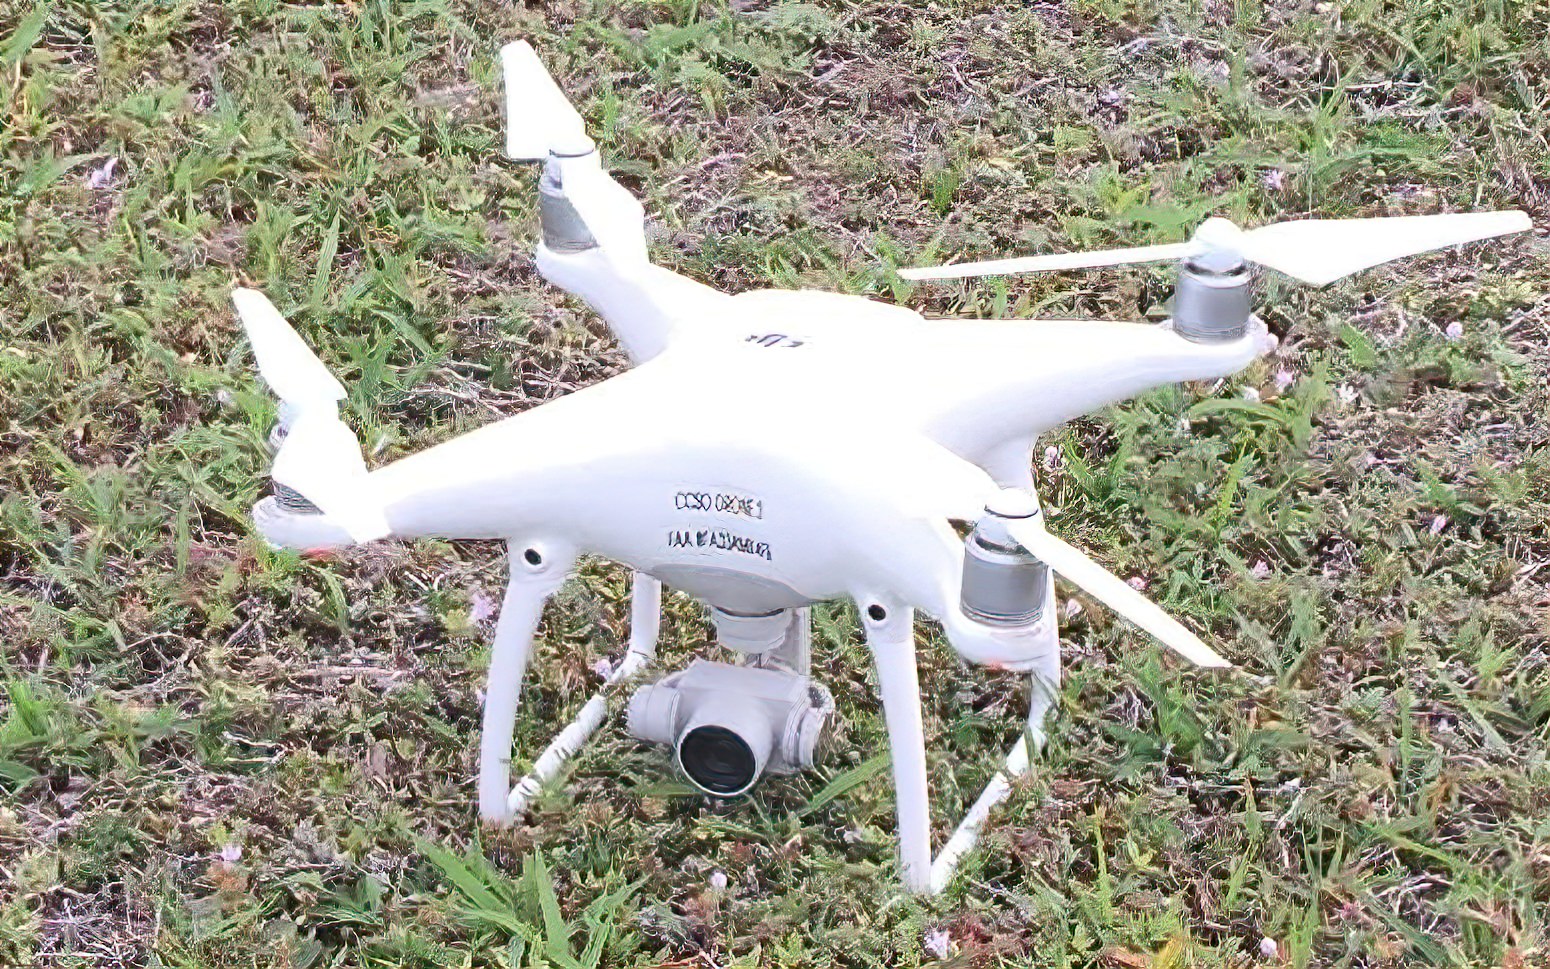 Six drones deployed to find missing 77-year-old man in Florida